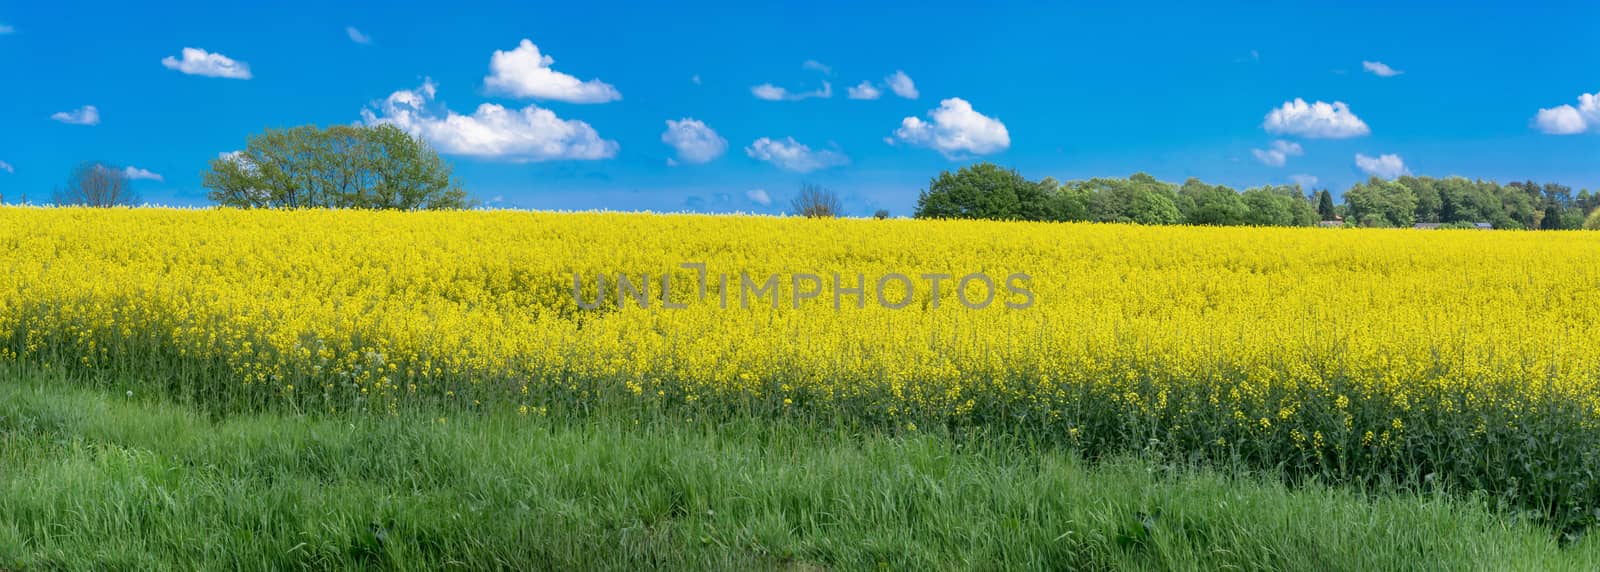 Blooming rapeseed field panorama with beautiful blue sky in the background. Symbolizing green energy.